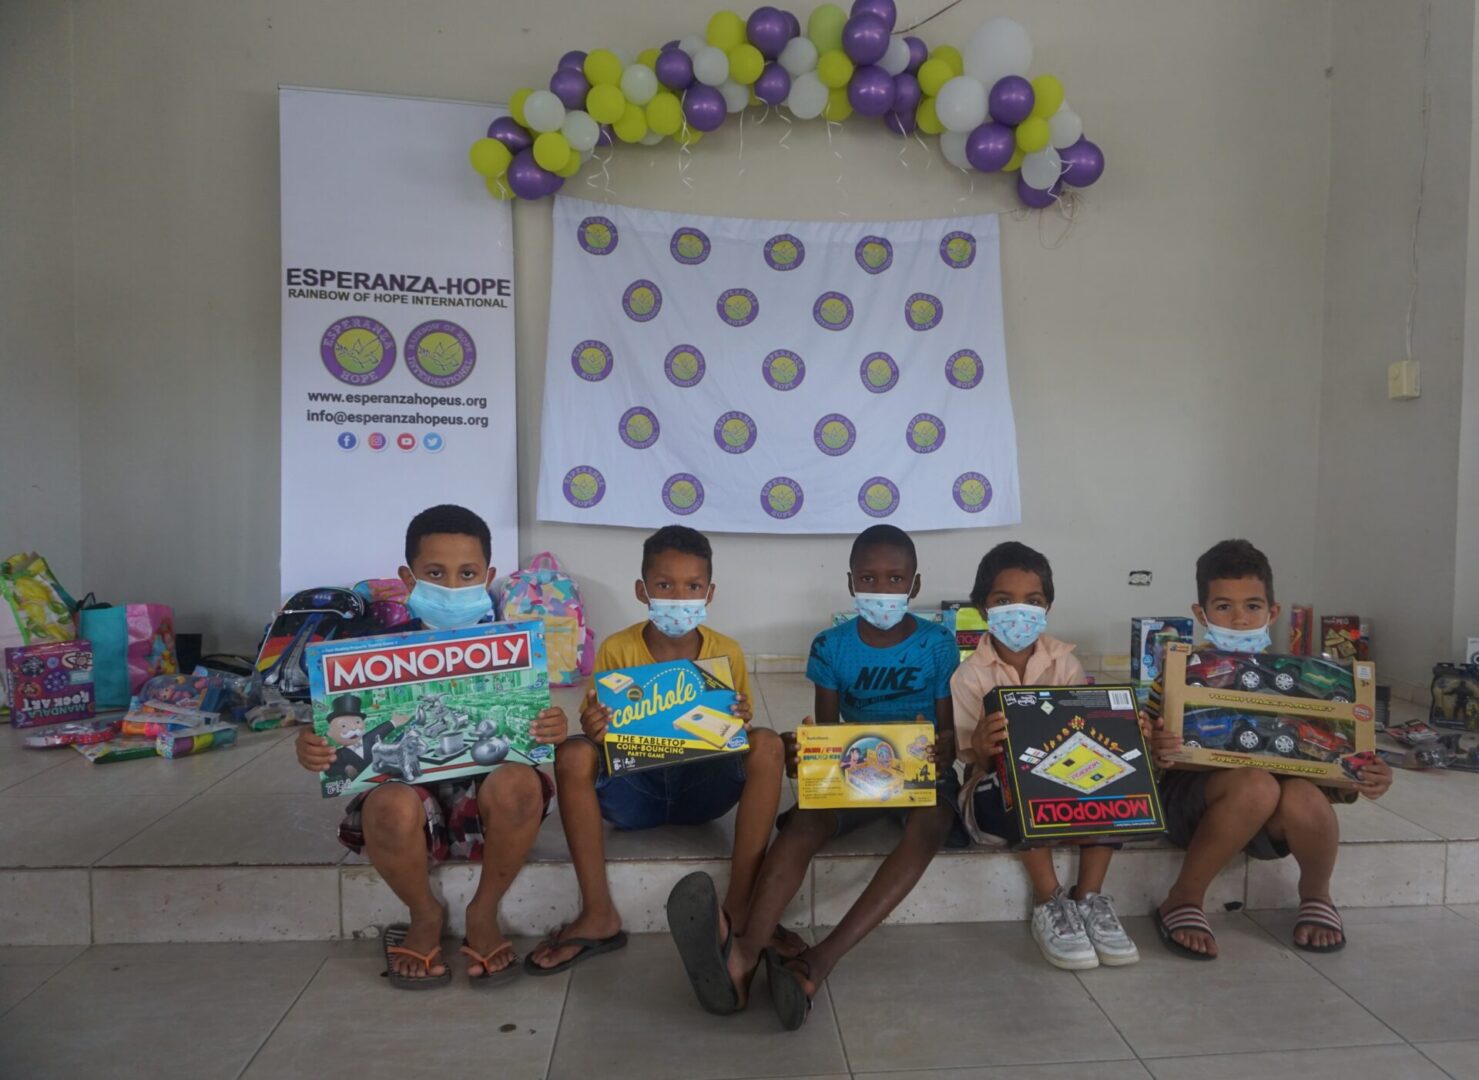 Five boys sitting on the elevated area with balloons and holding boxes of toys